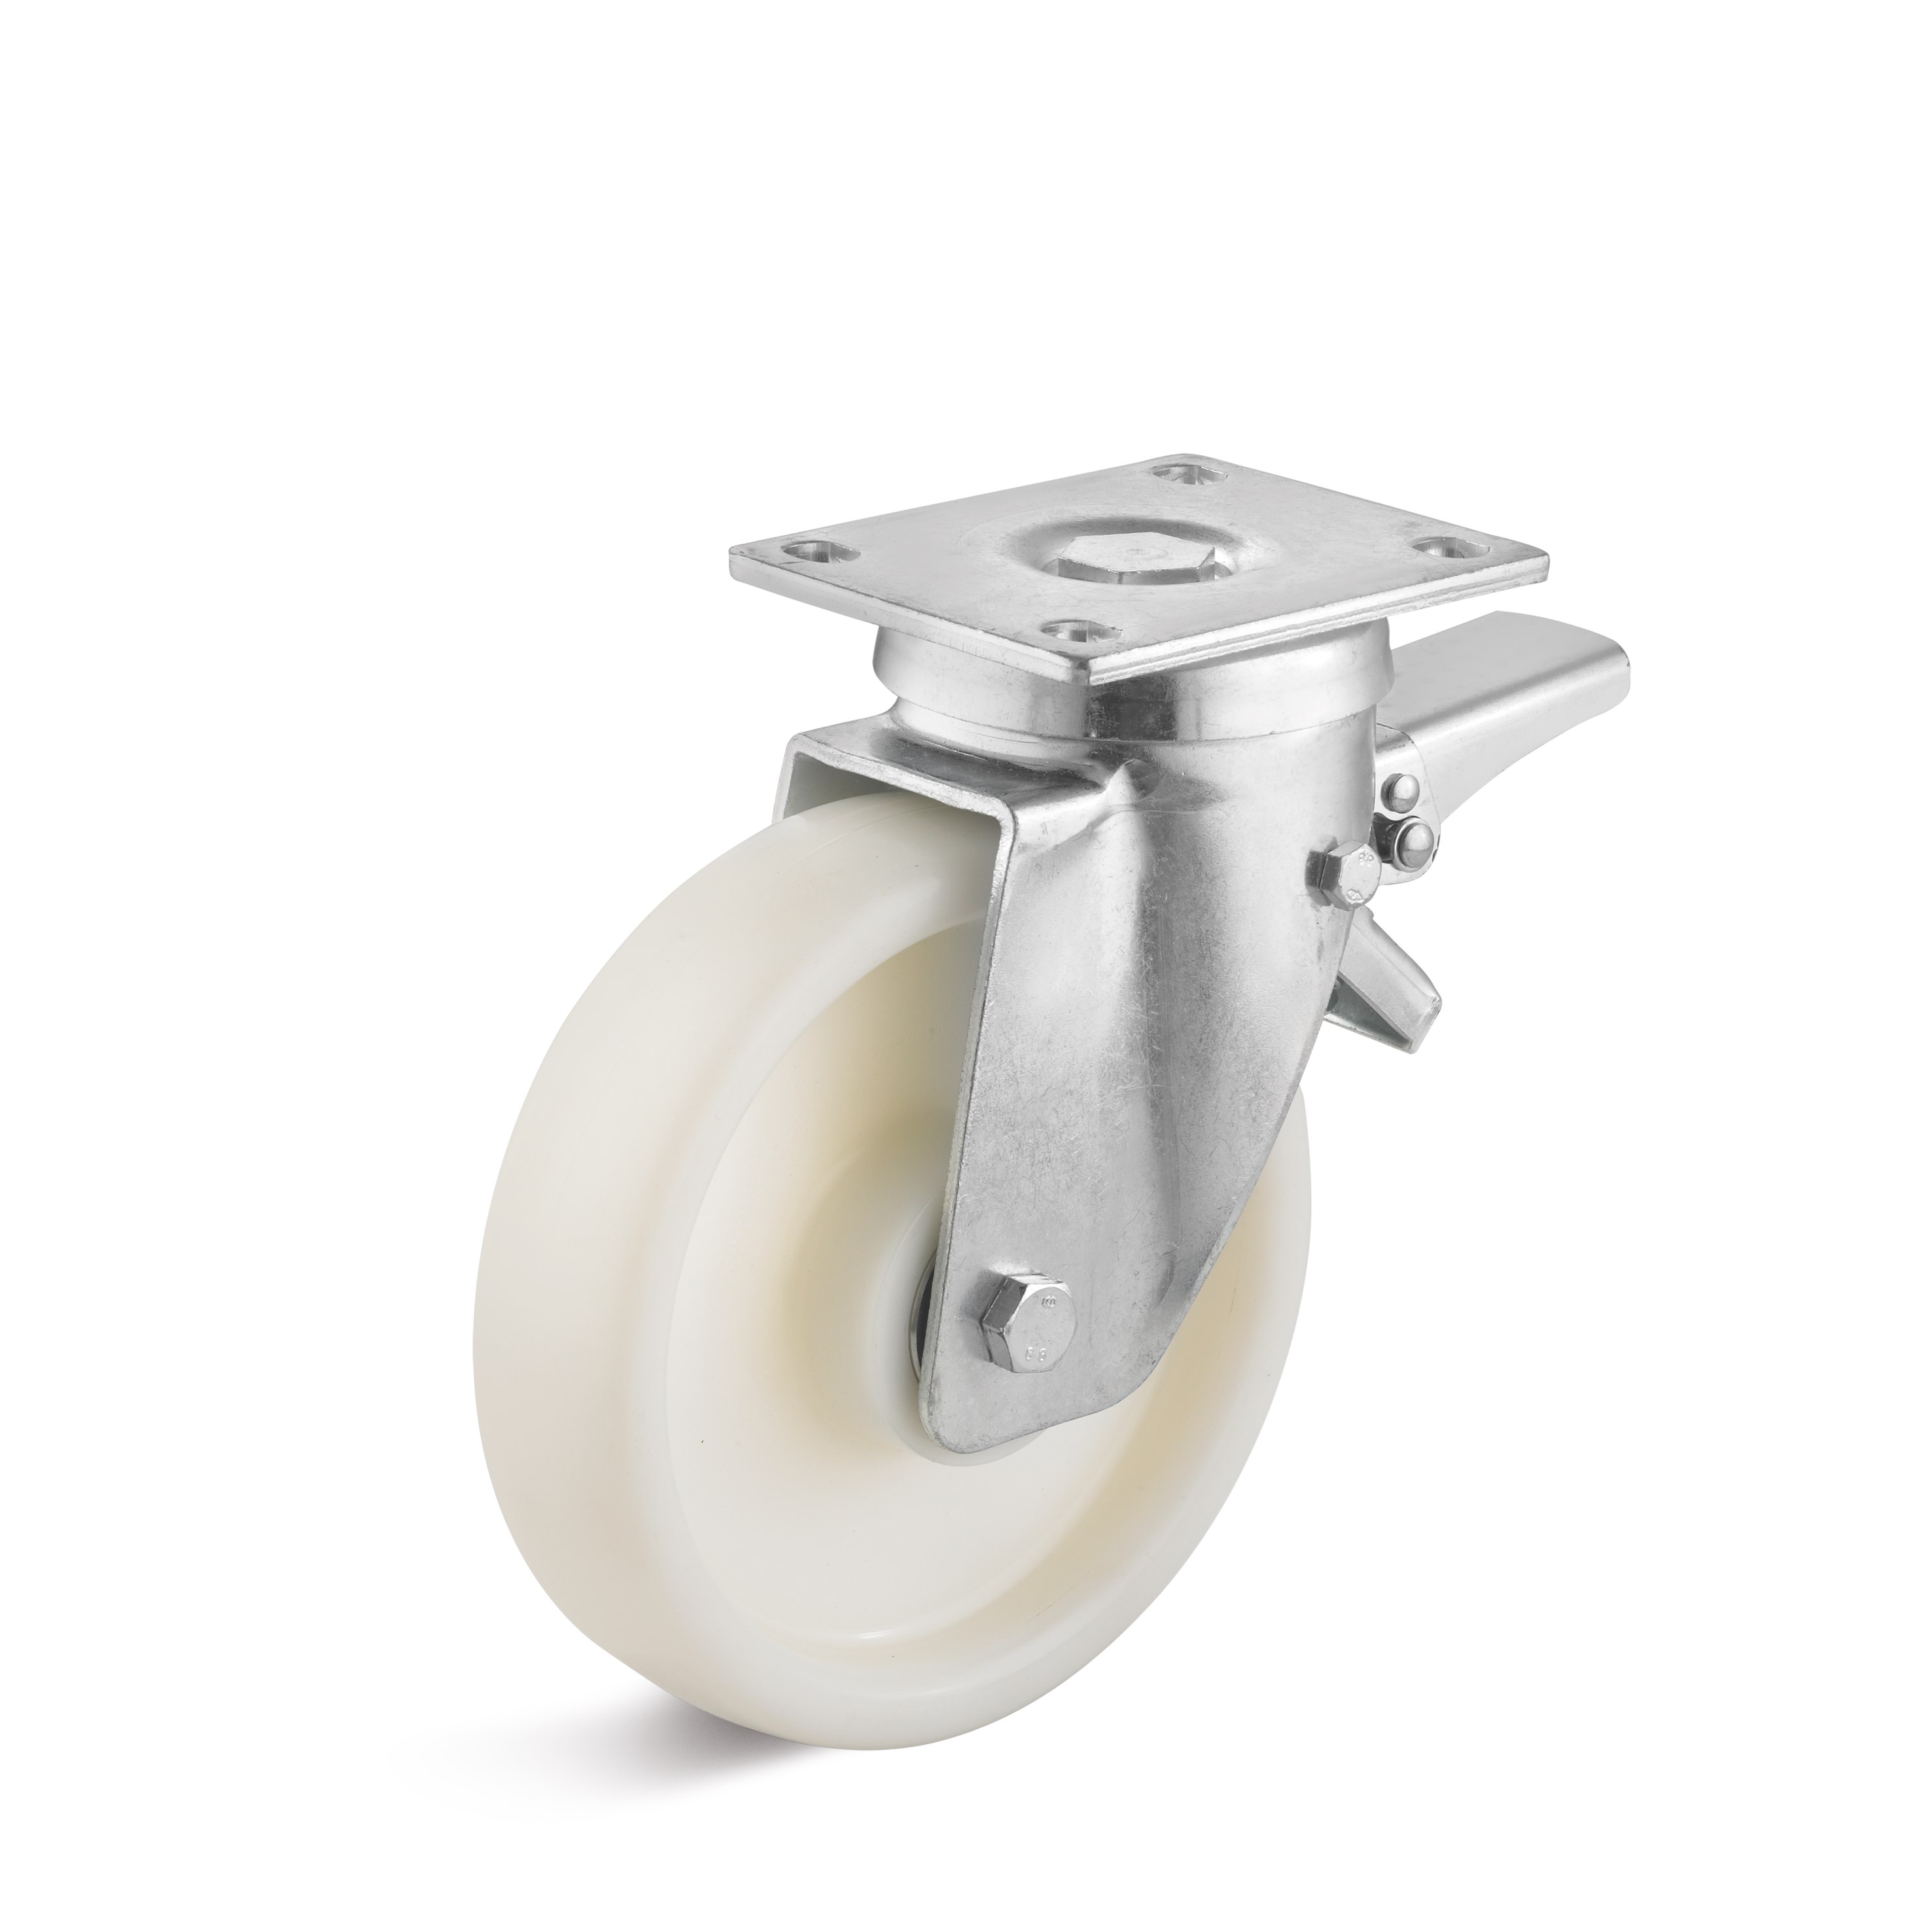 Heavy duty swivel castor with double stop and polyamide wheel